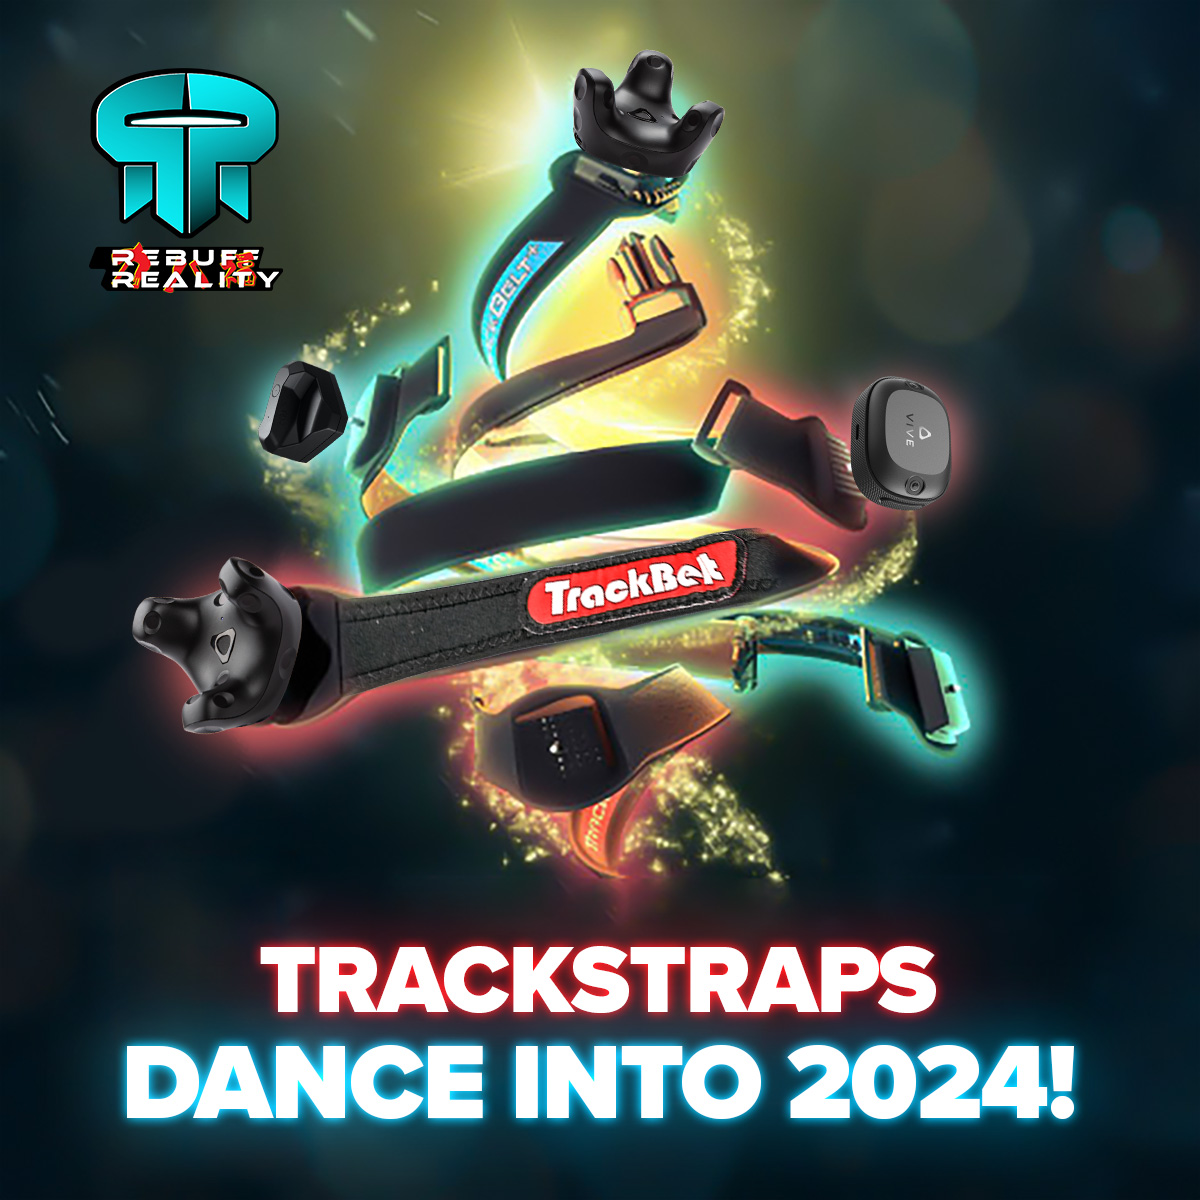 Get ready to move like never before in 2024! 🕺✨ Our TrackStraps are your ticket to full-body tracking. Feel every beat in VR. Explore more at Rebuff Reality! 🛒rebuffreality.com

#TrackStraps #FullBodyVR #DanceInto2024